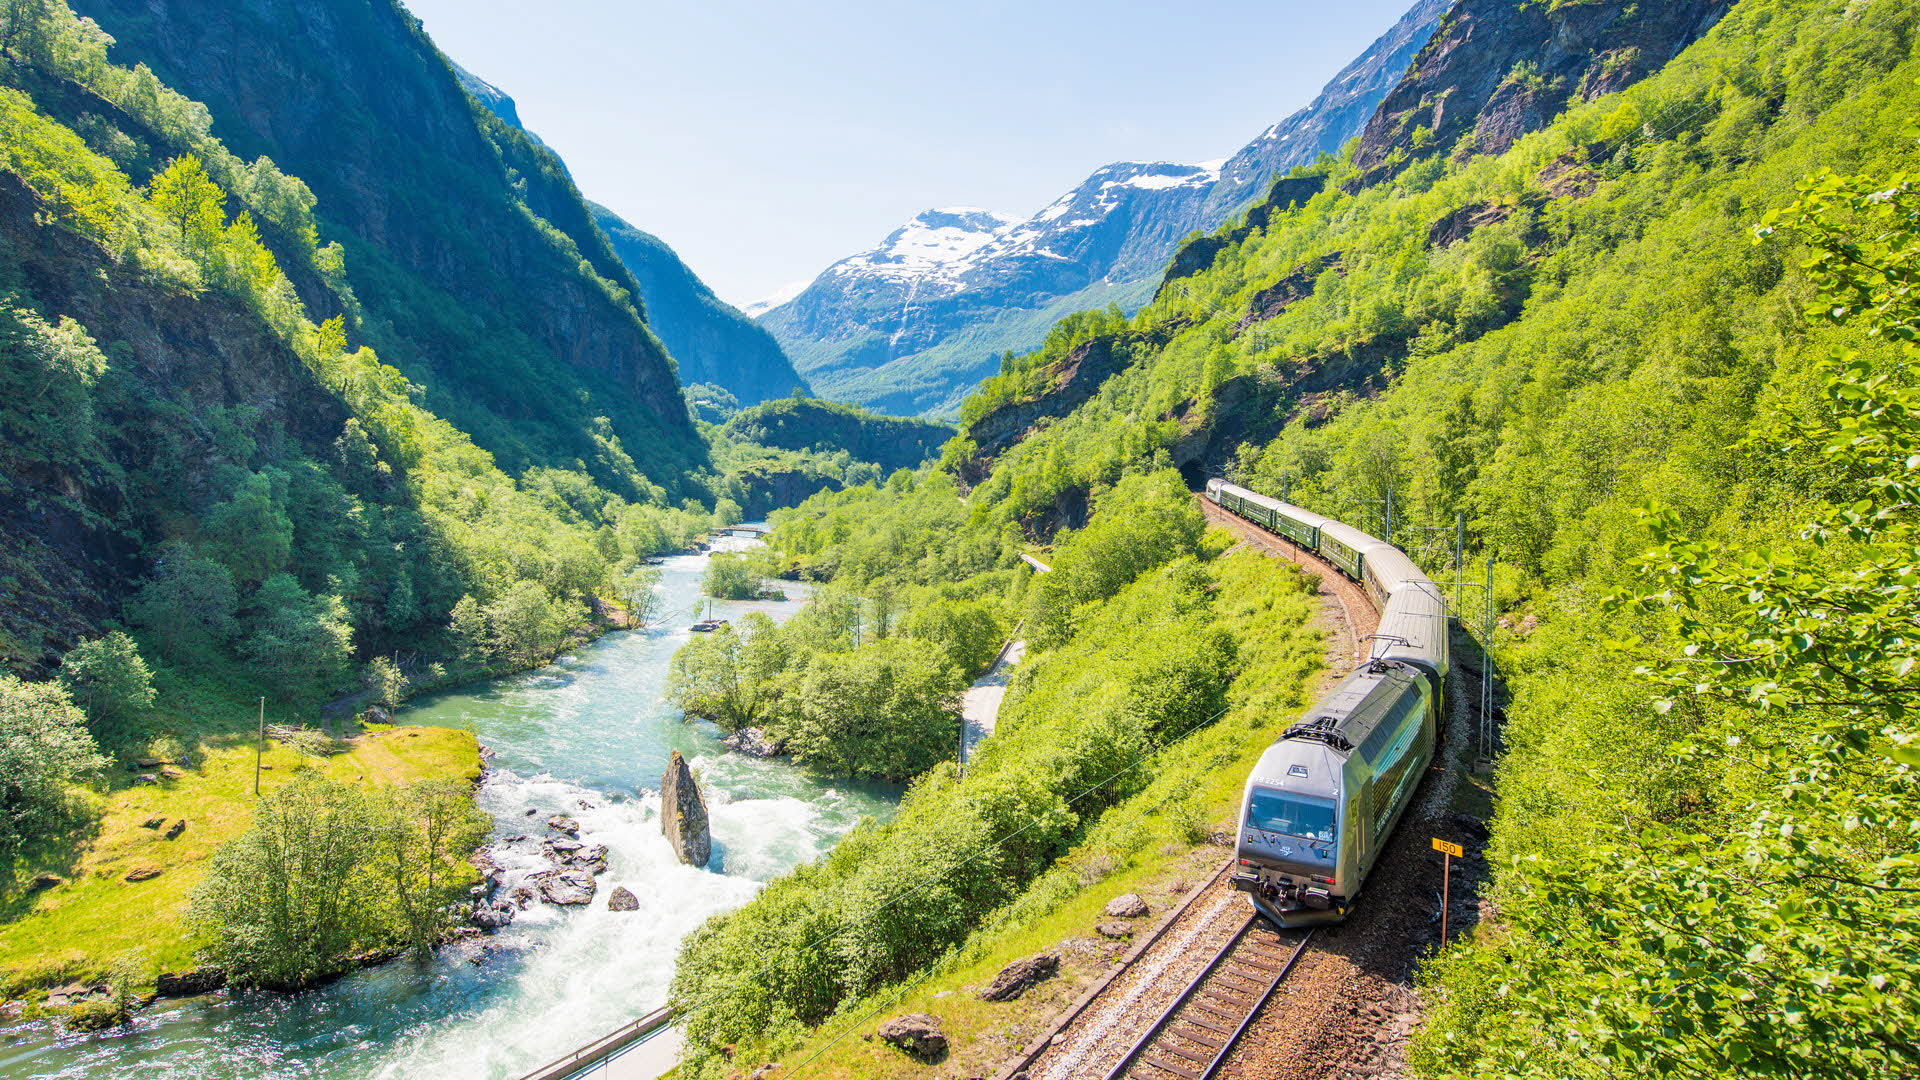 Flam Railway going down the Flam Valley in summer with green hills and snow covered peaks